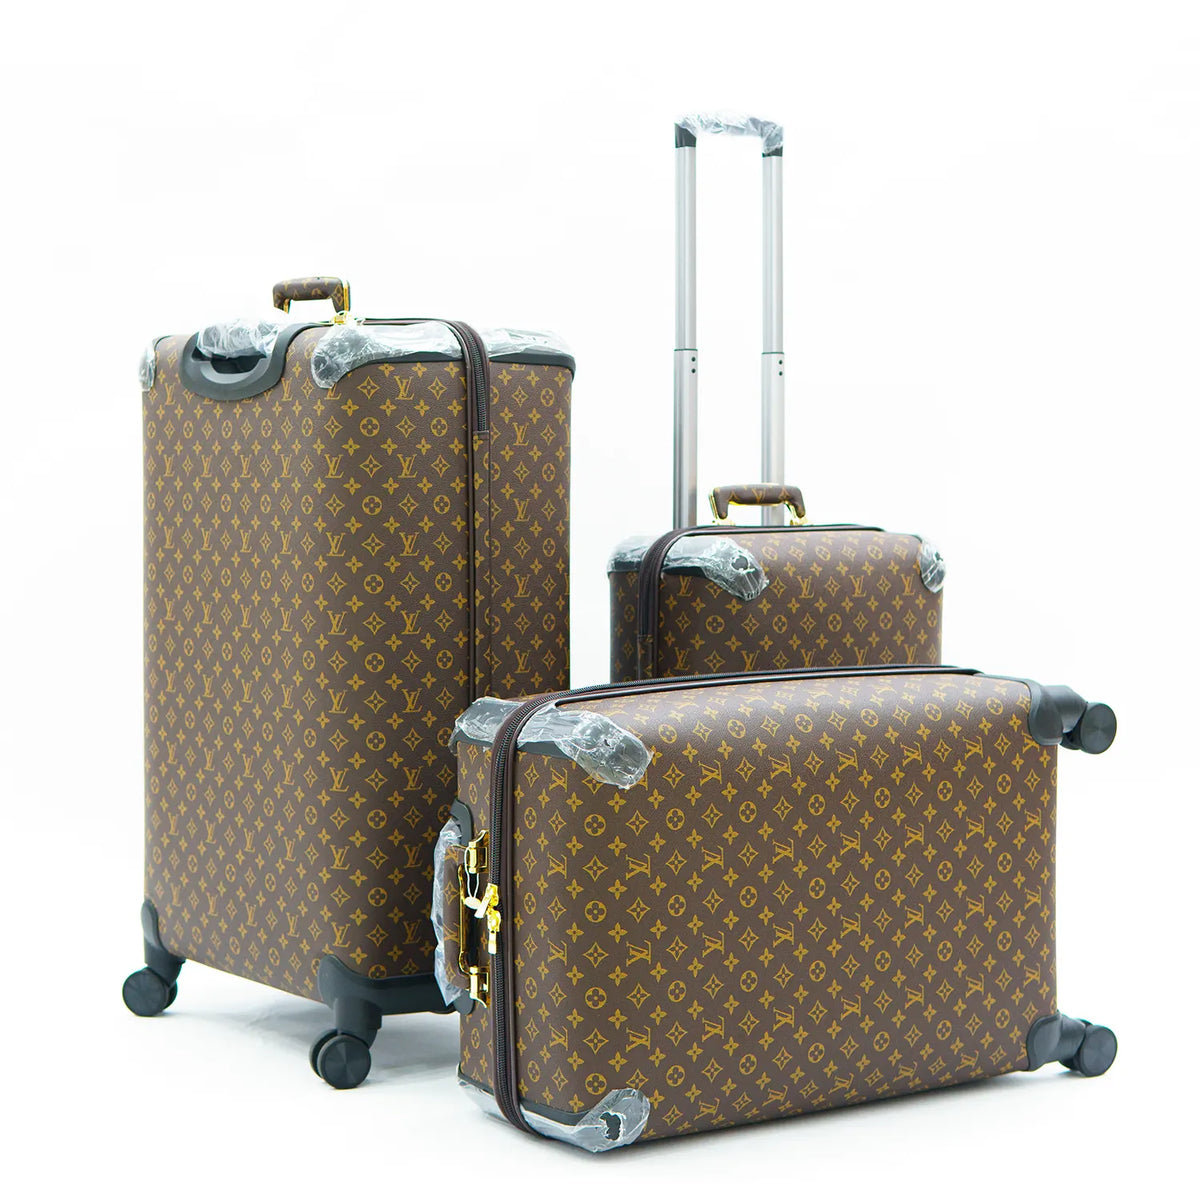 Elite Travel Companion: High-Quality Luggage Briefcase for Unmatched Style